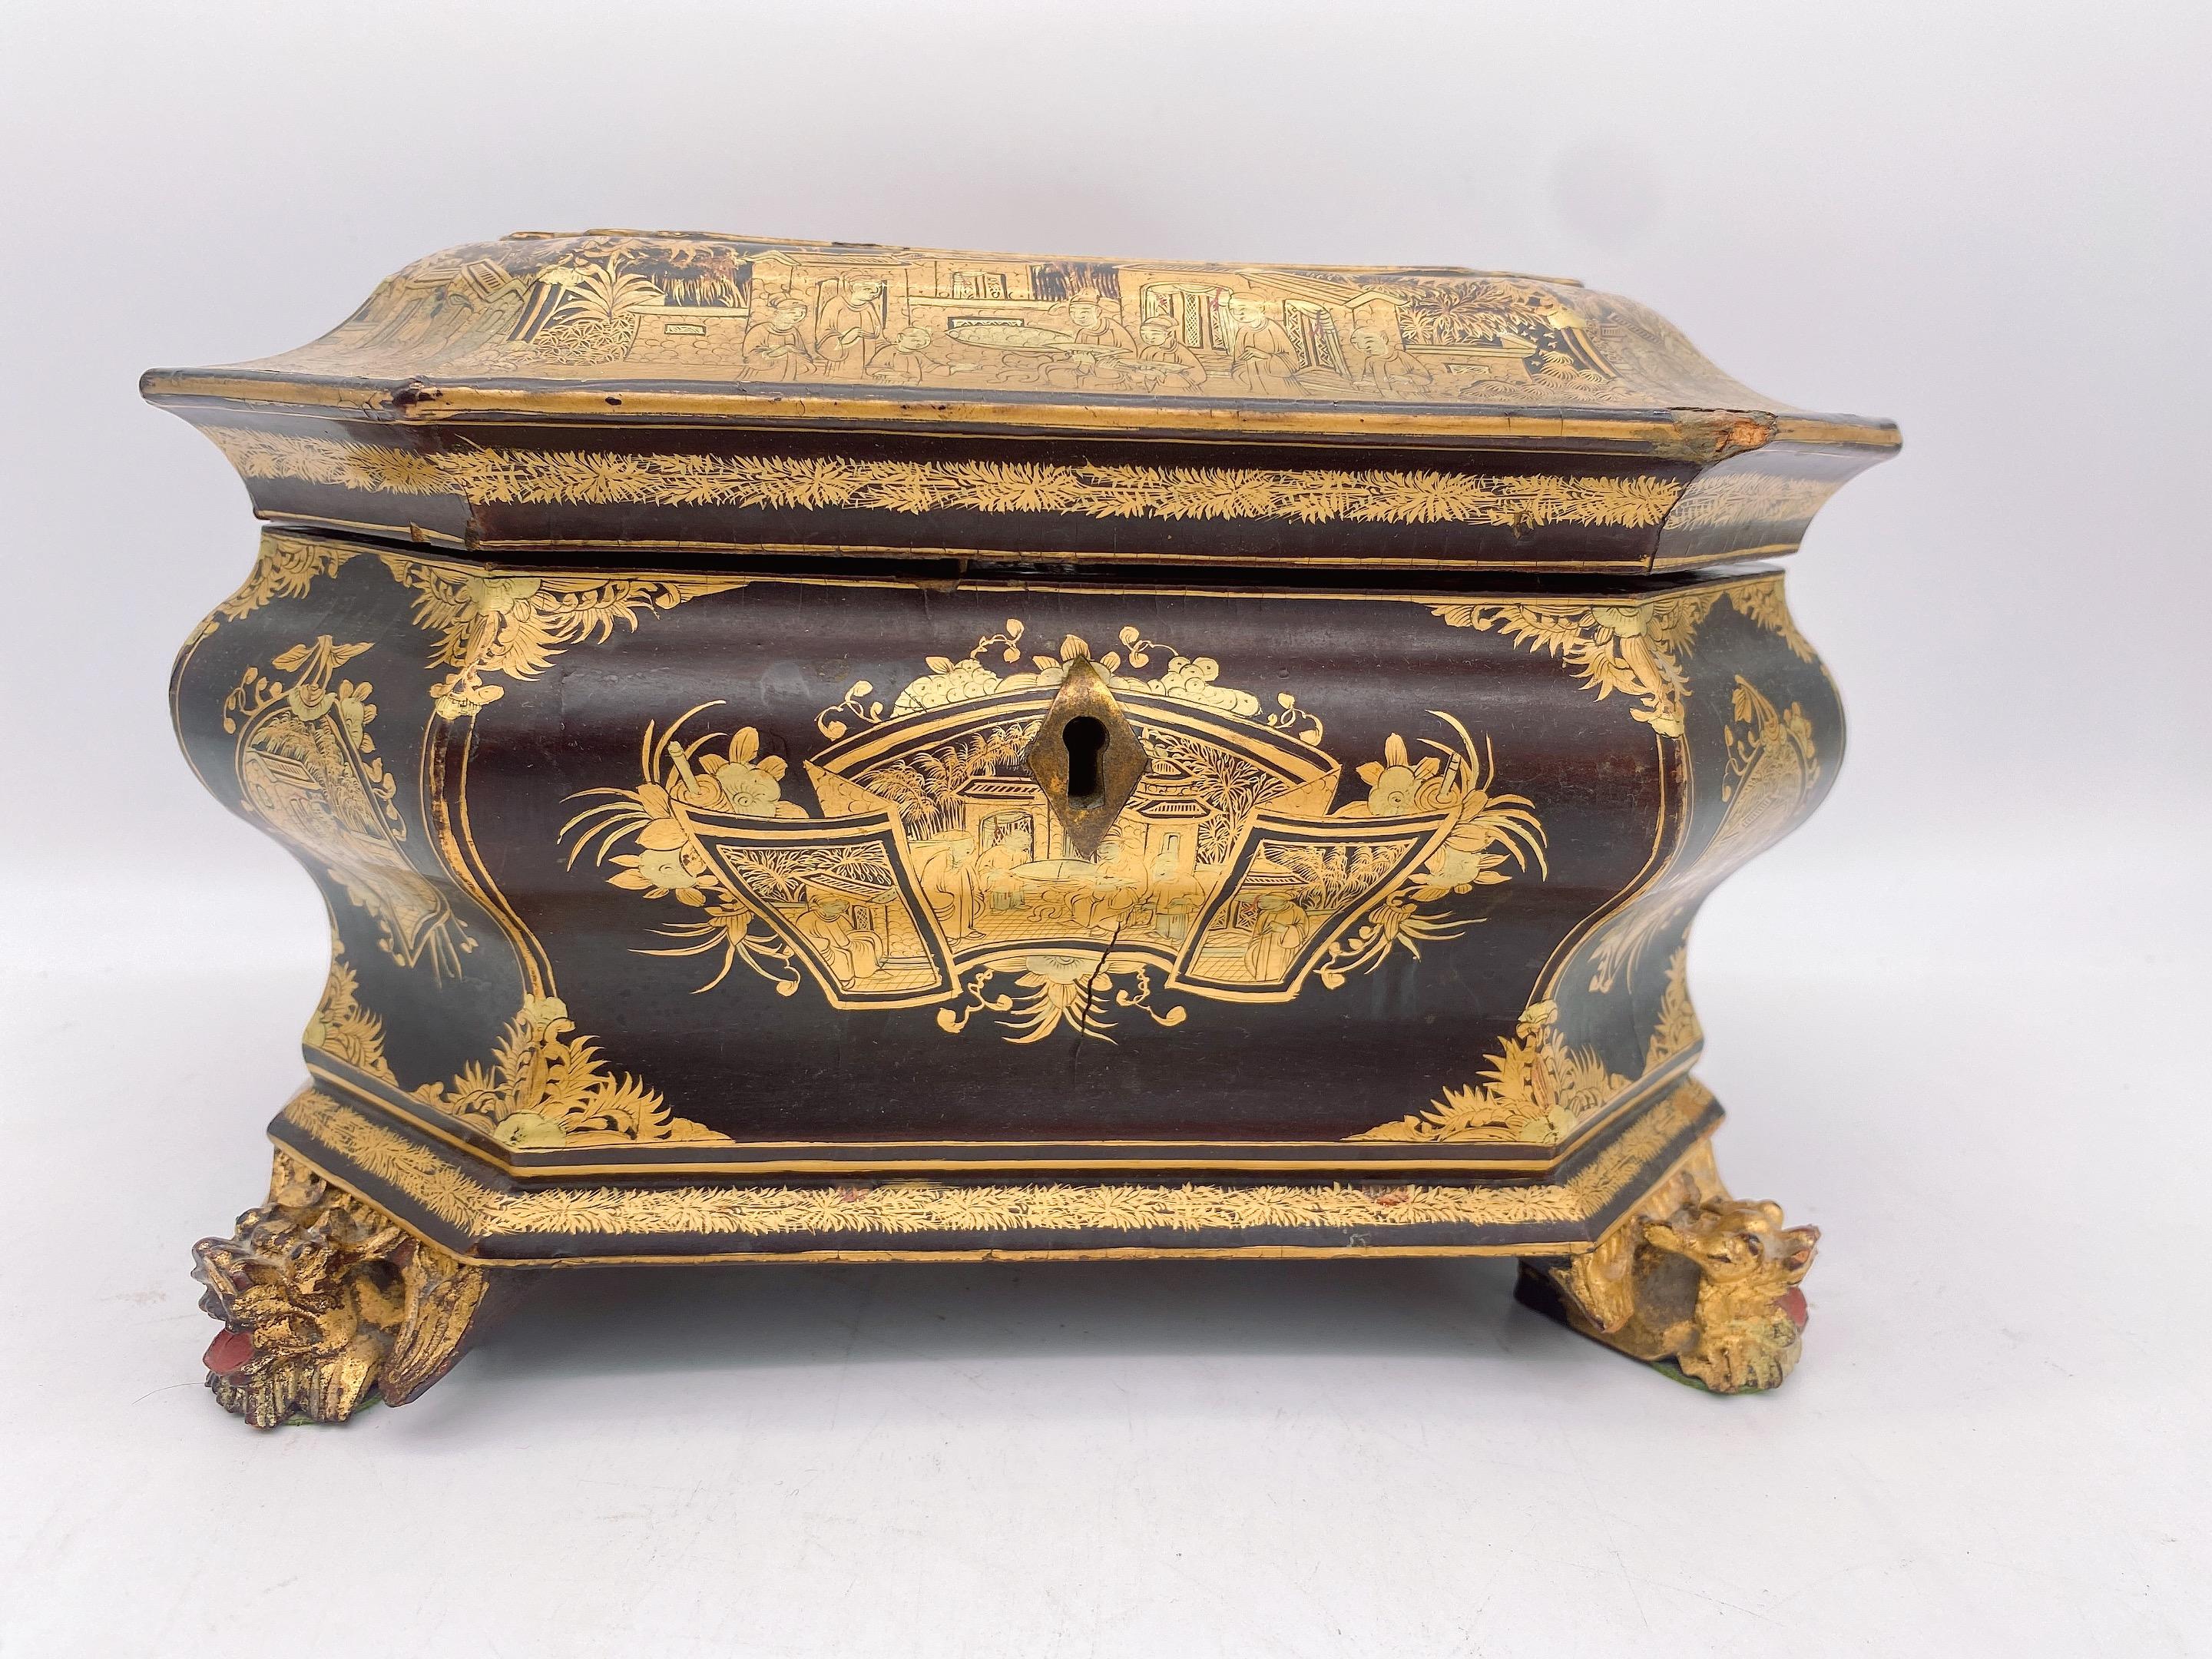 Qing 19th Century Antique Gilt Lacquer Chinese Tea Caddy